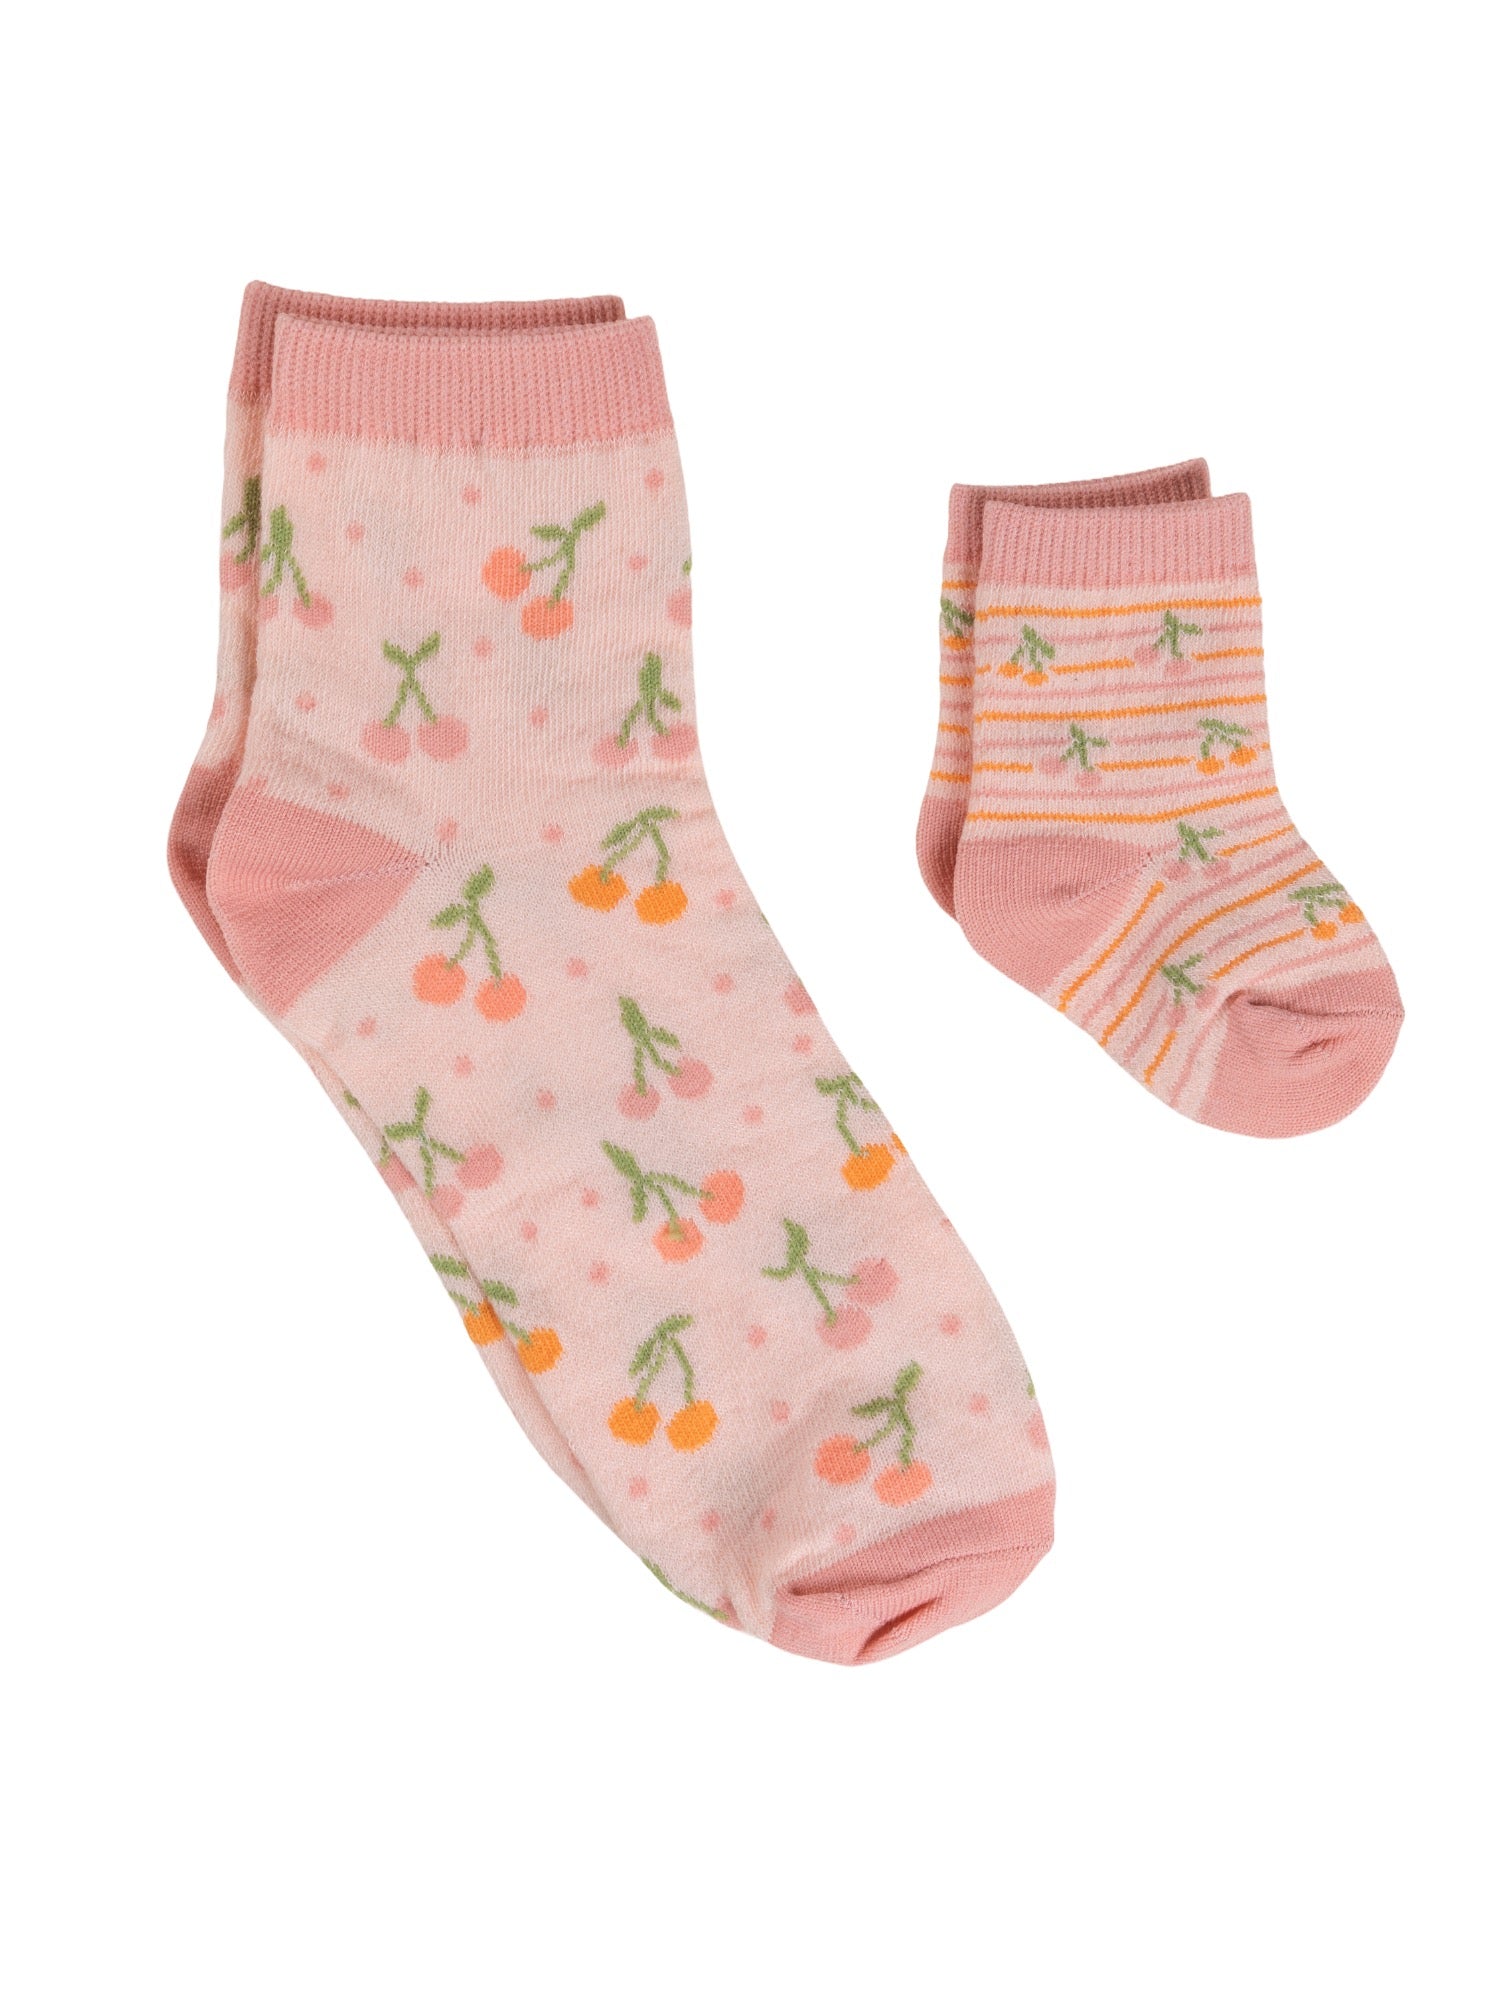 Mama & Me Socks - Cherry Cute By Doodle By Meg